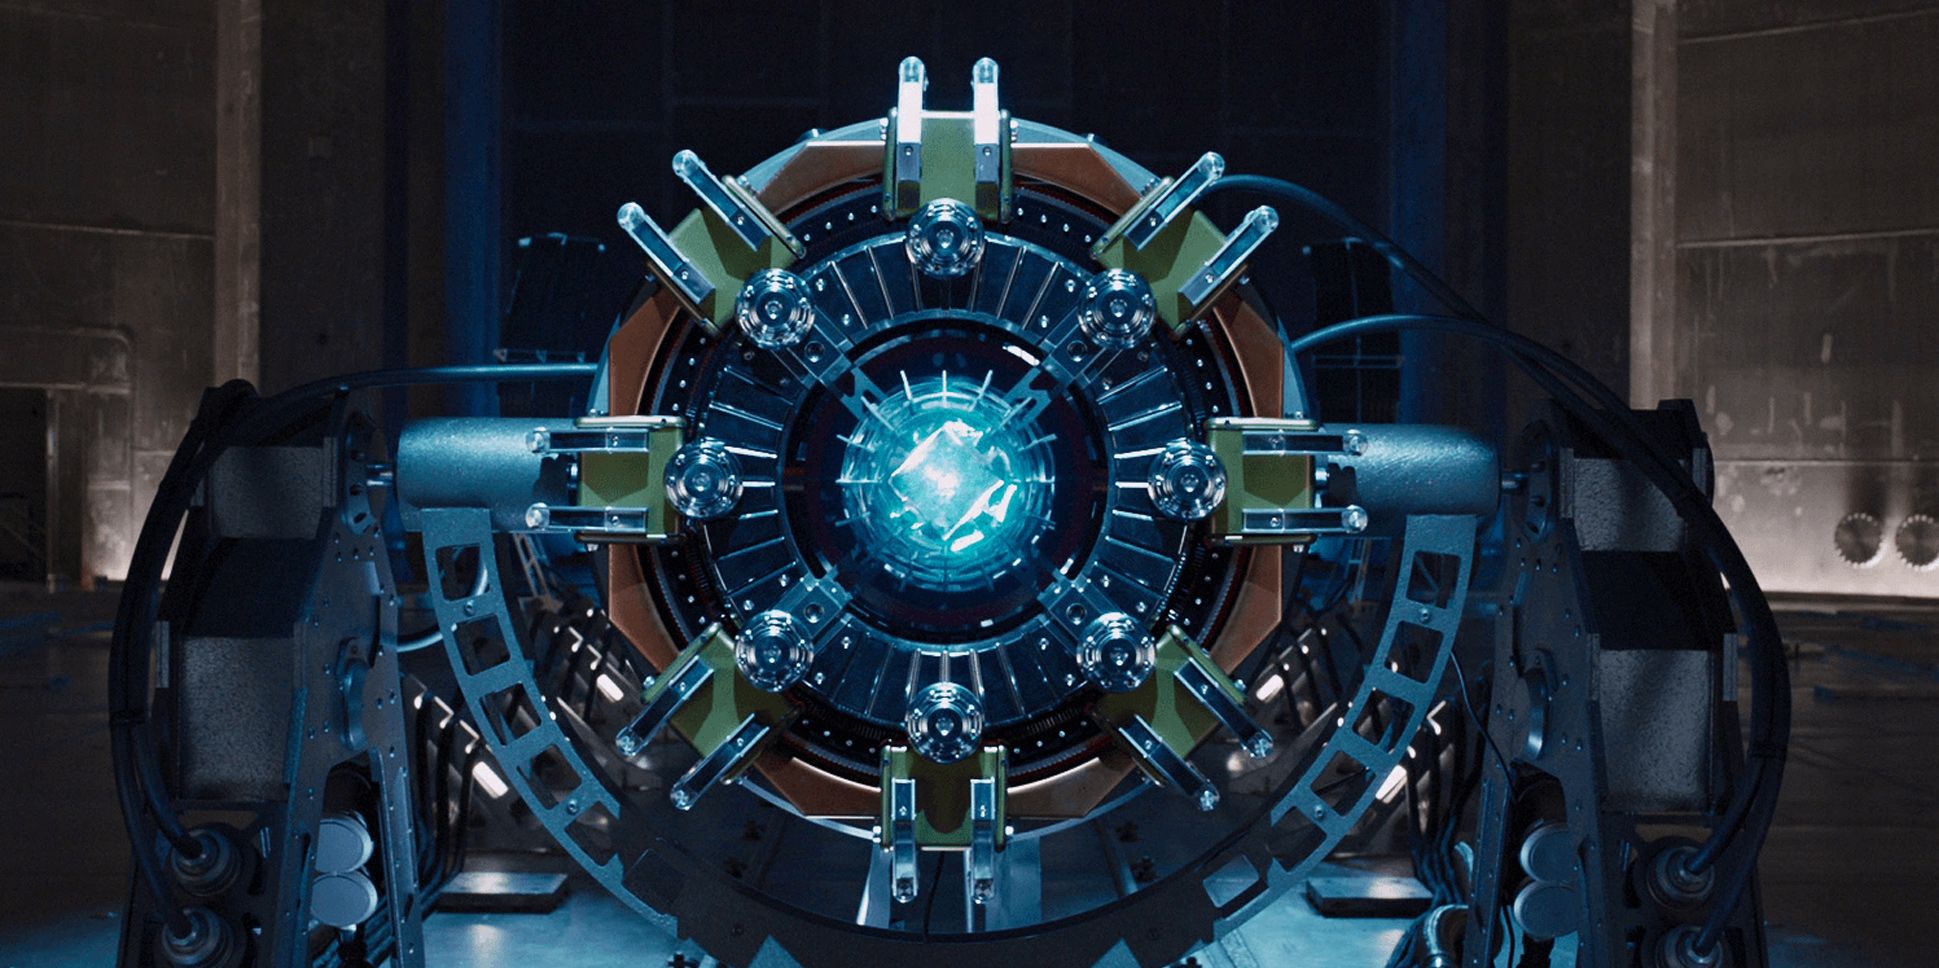 The Tesseract in a S.H.I.E.L.D. Facility